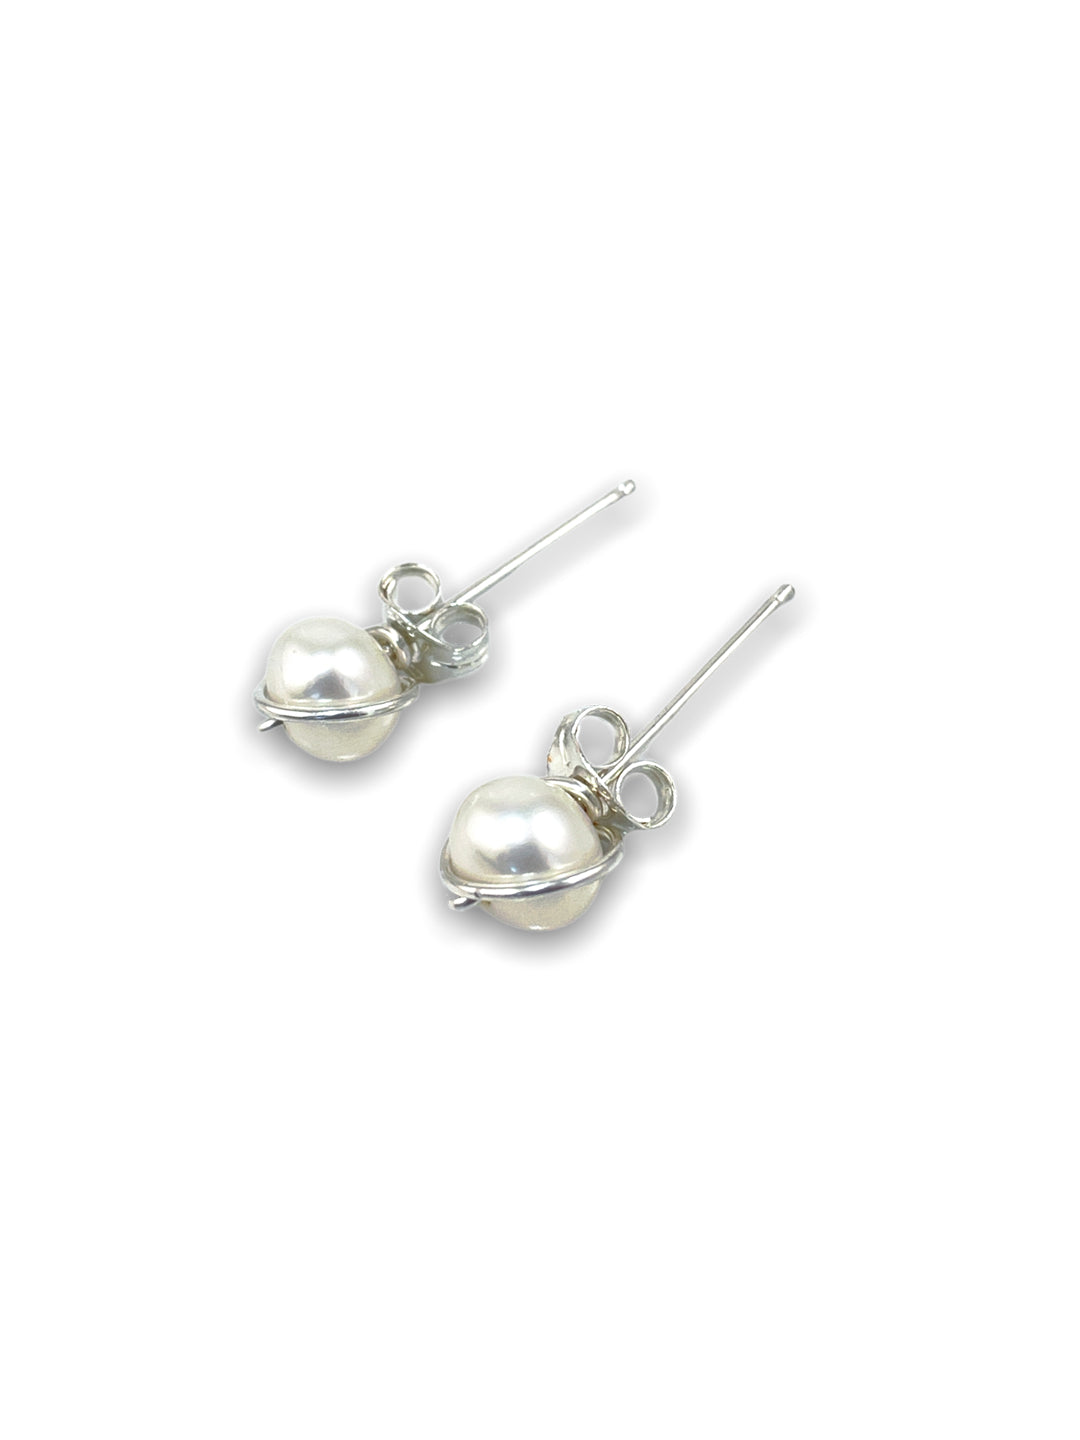 Pearl stud earring for Mother's Day gift or June birthstone